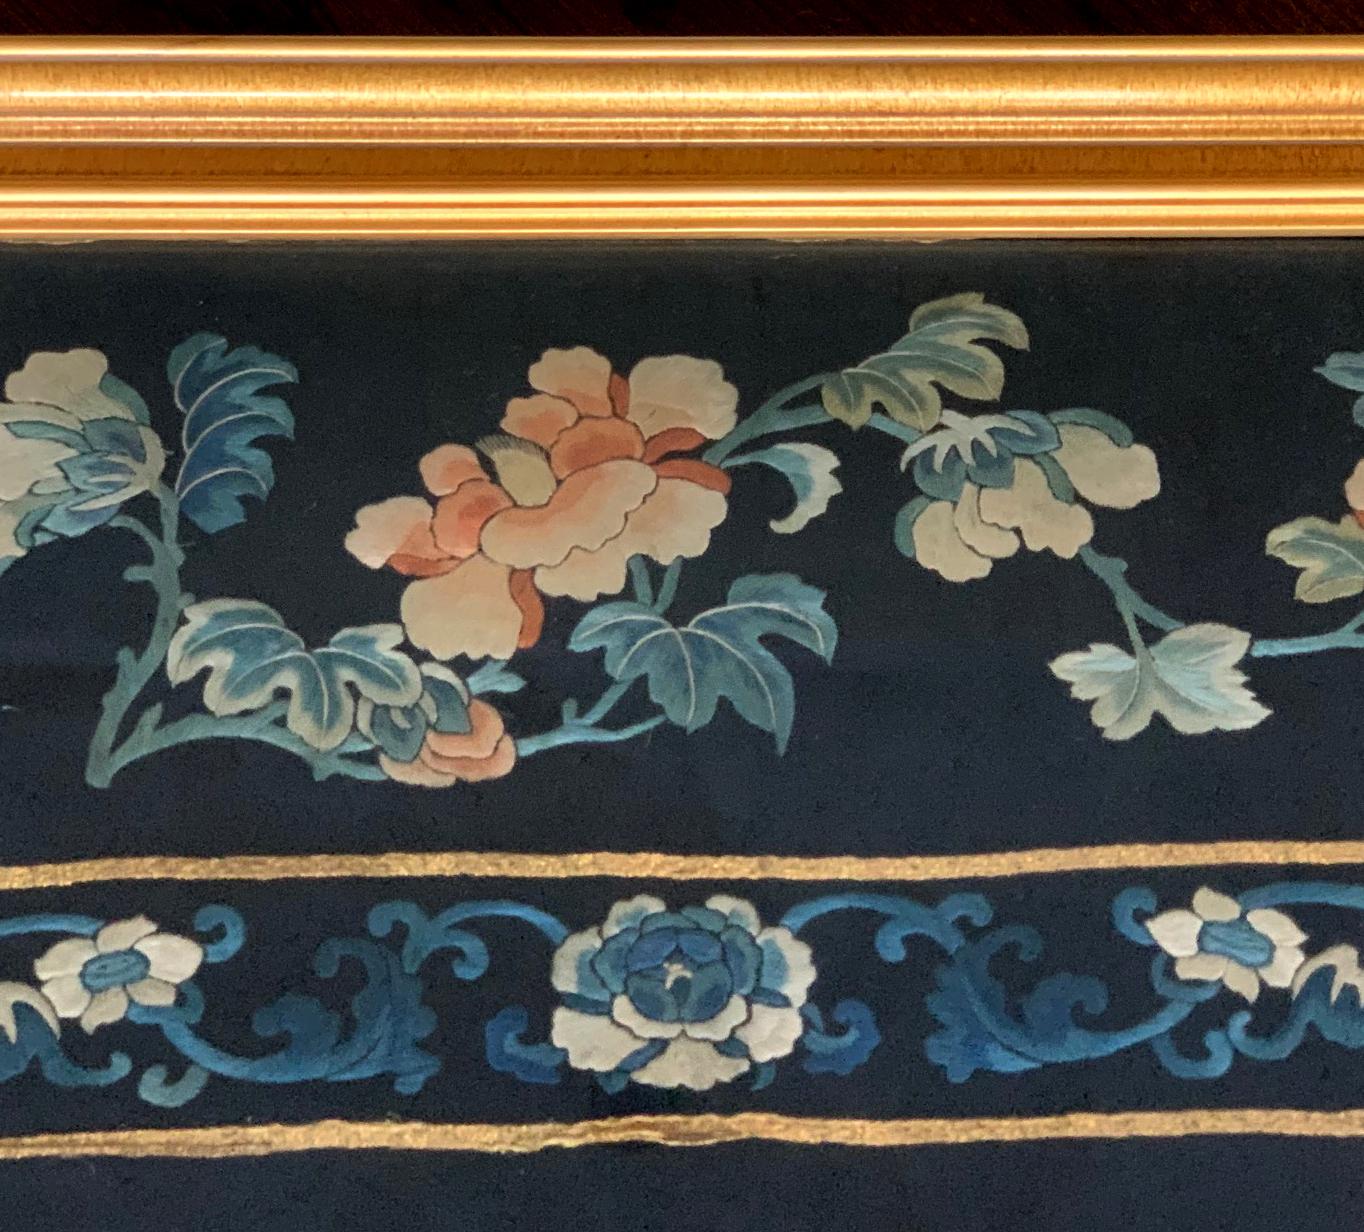 Framed Antique Chinese Embroidery Panel Qing Dynasty 2